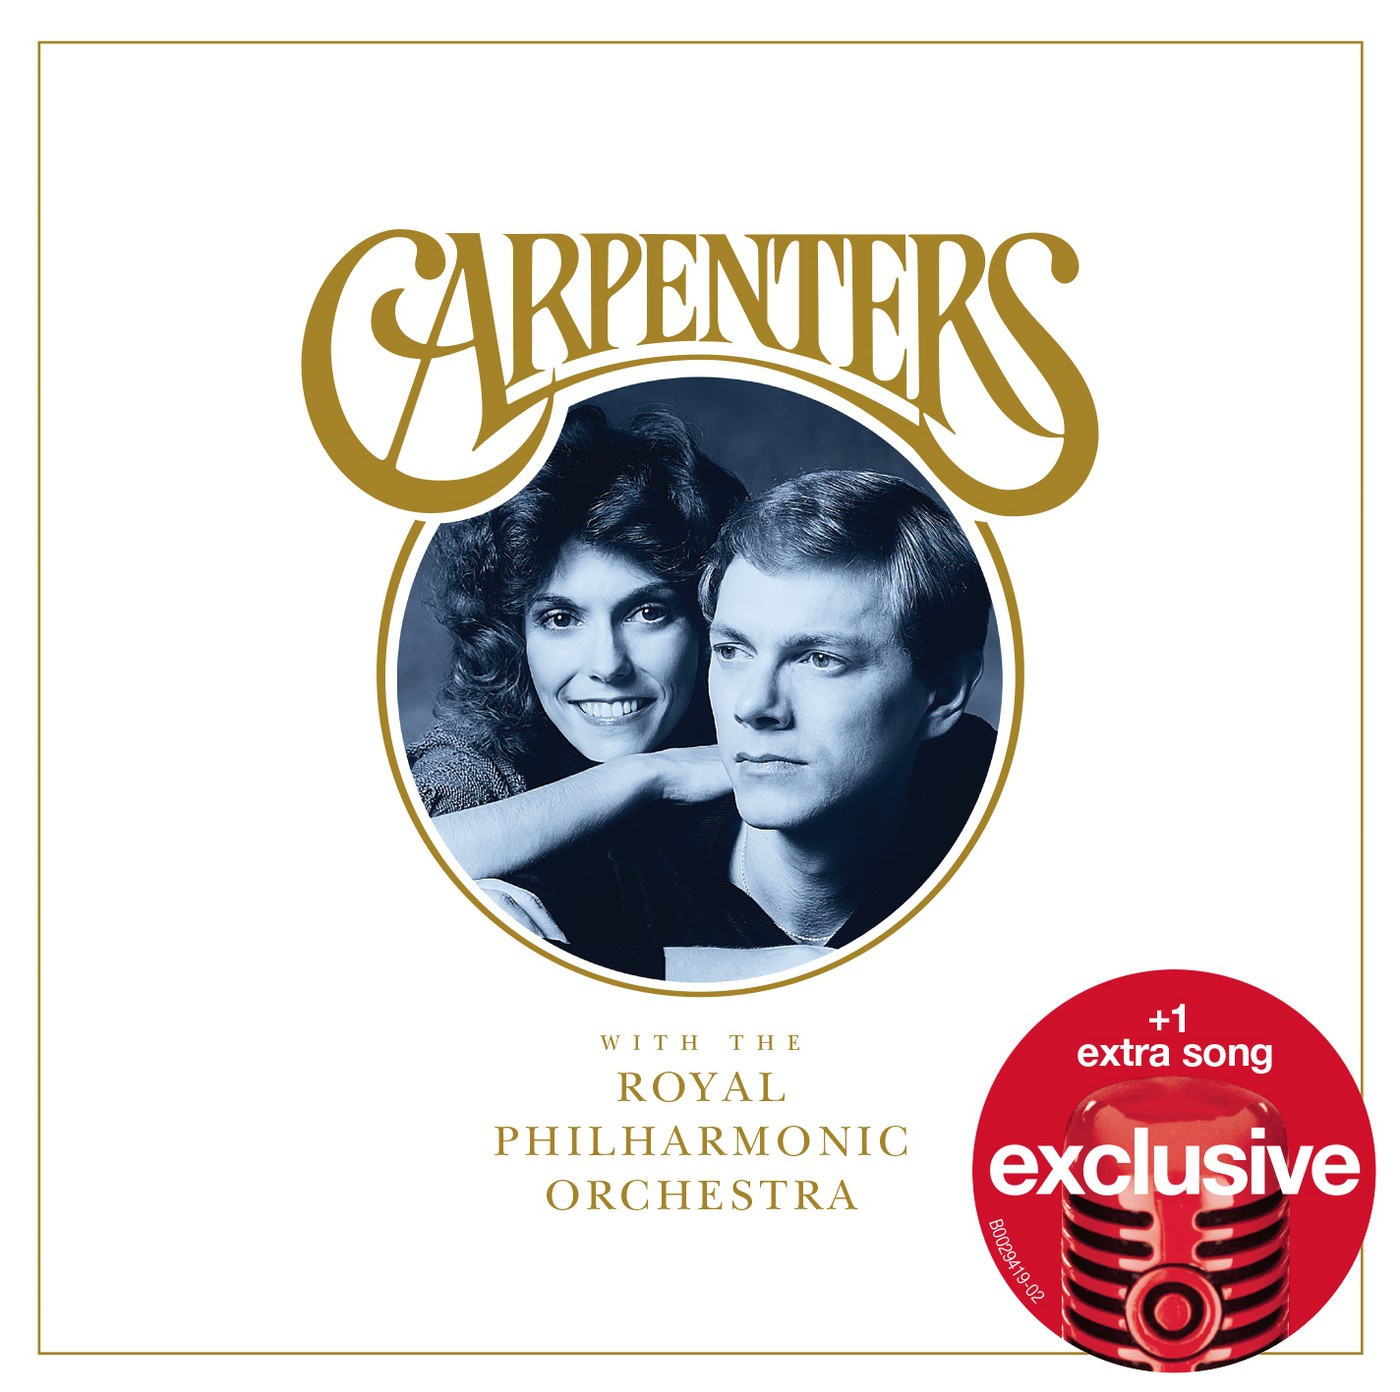 CARPENTERS / カーペンターズ / CARPENTERS WITH THE ROYAL PHILHARMONIC ORCHESTRA (TARGET EXCLUSIVE CD)